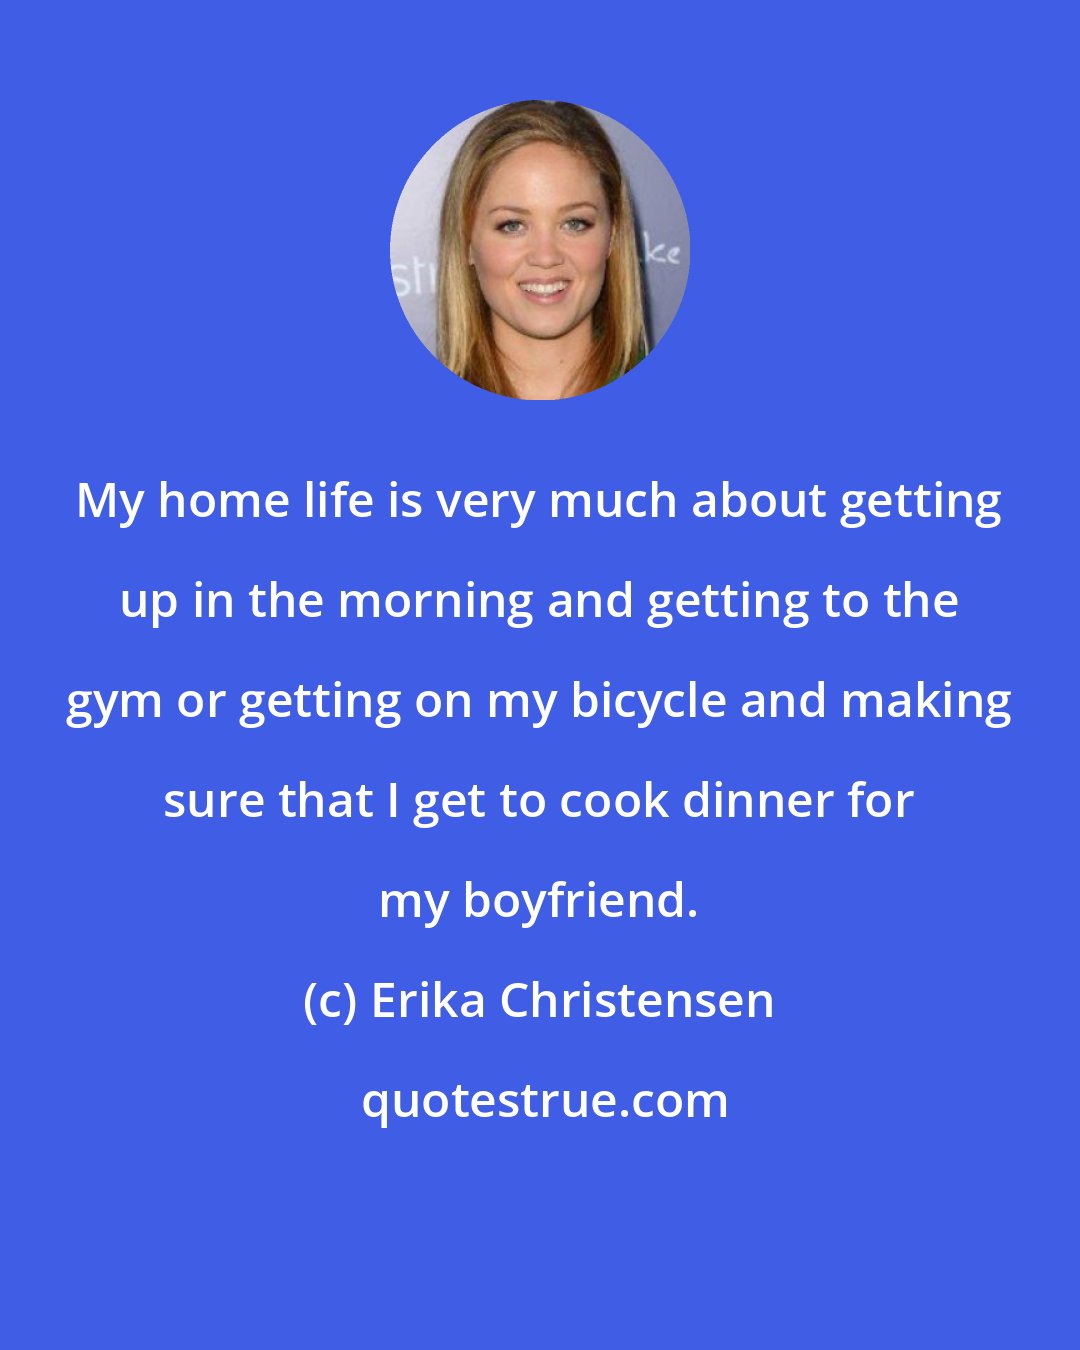 Erika Christensen: My home life is very much about getting up in the morning and getting to the gym or getting on my bicycle and making sure that I get to cook dinner for my boyfriend.